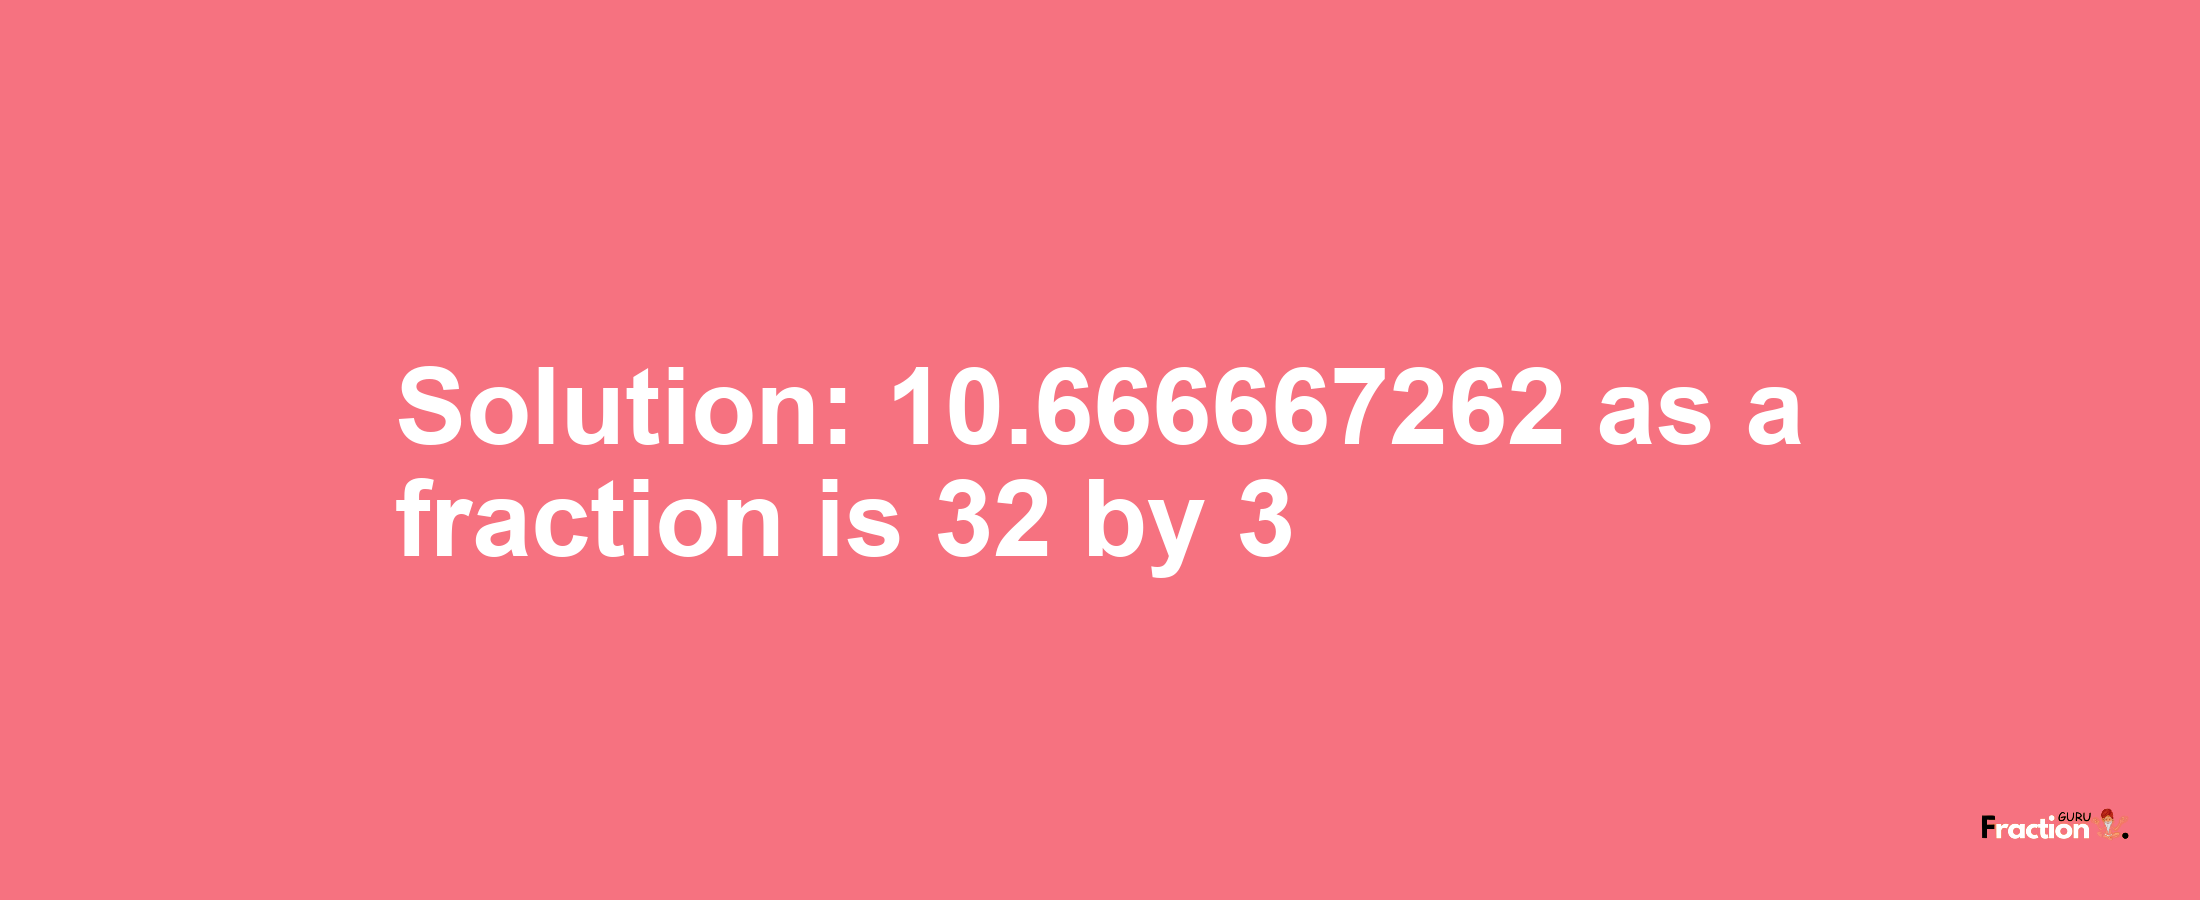 Solution:10.666667262 as a fraction is 32/3